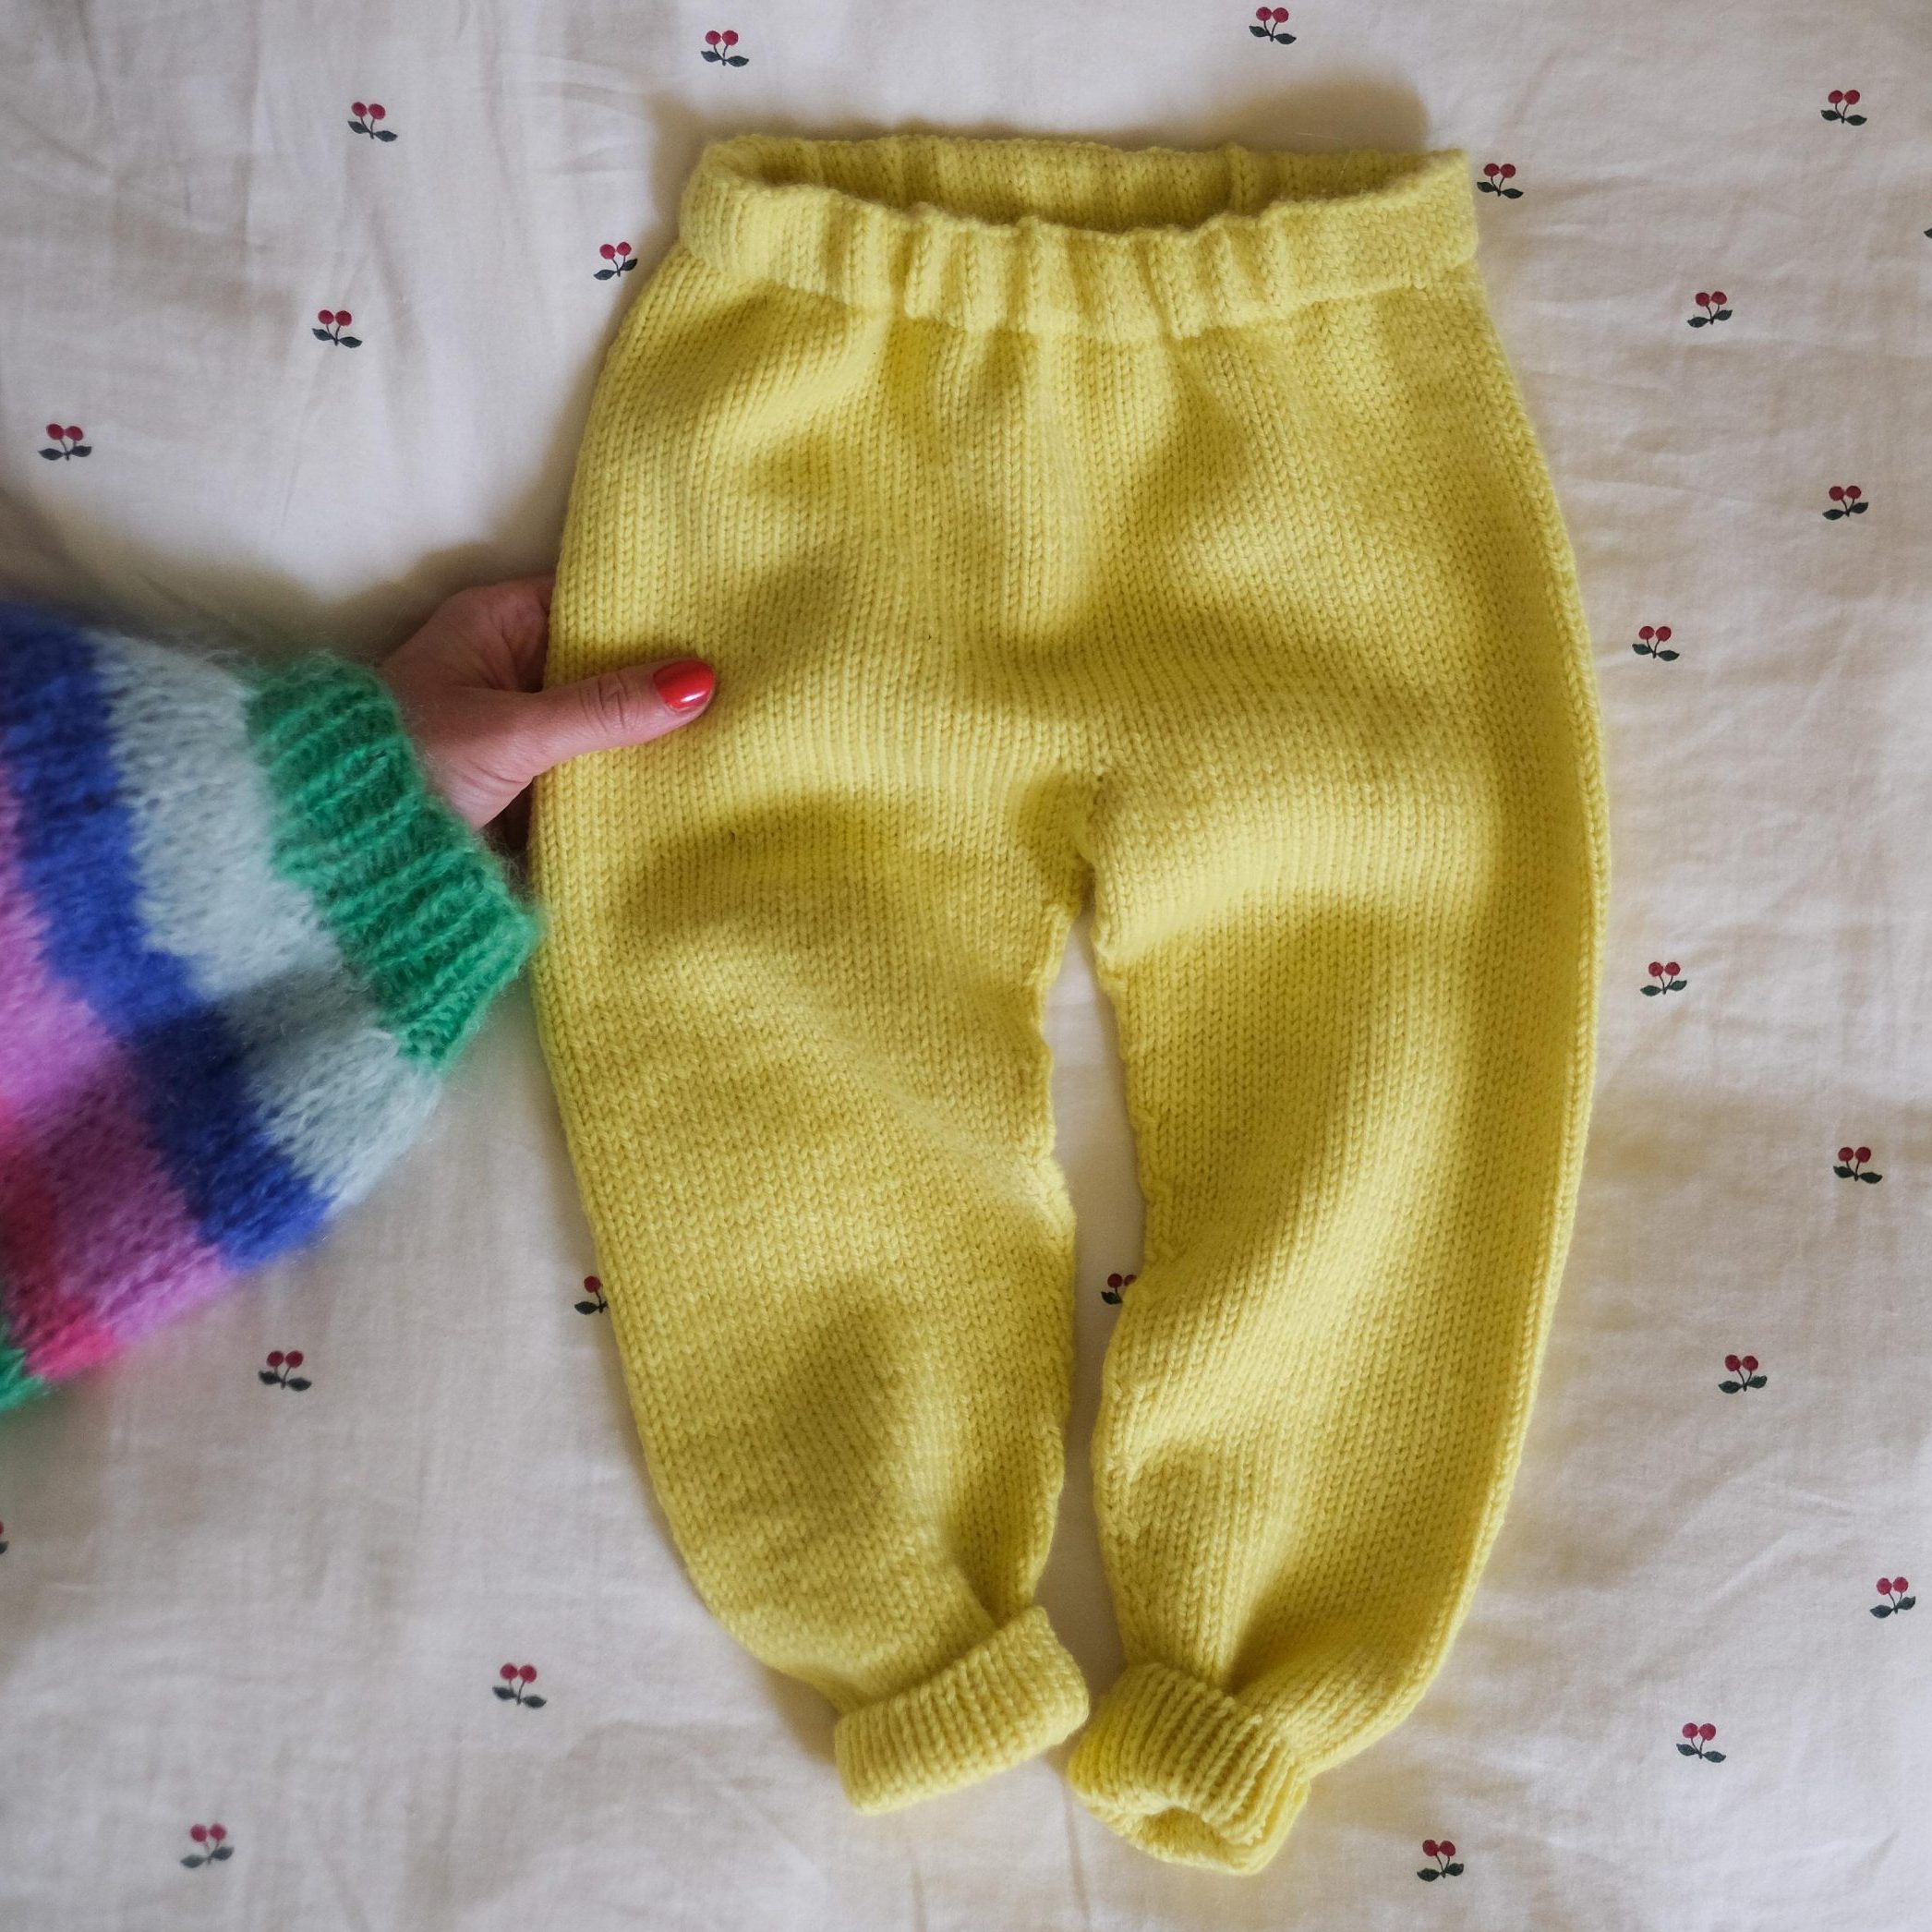 Baby Pants knitting pattern for 3 months old - So Woolly | So Woolly